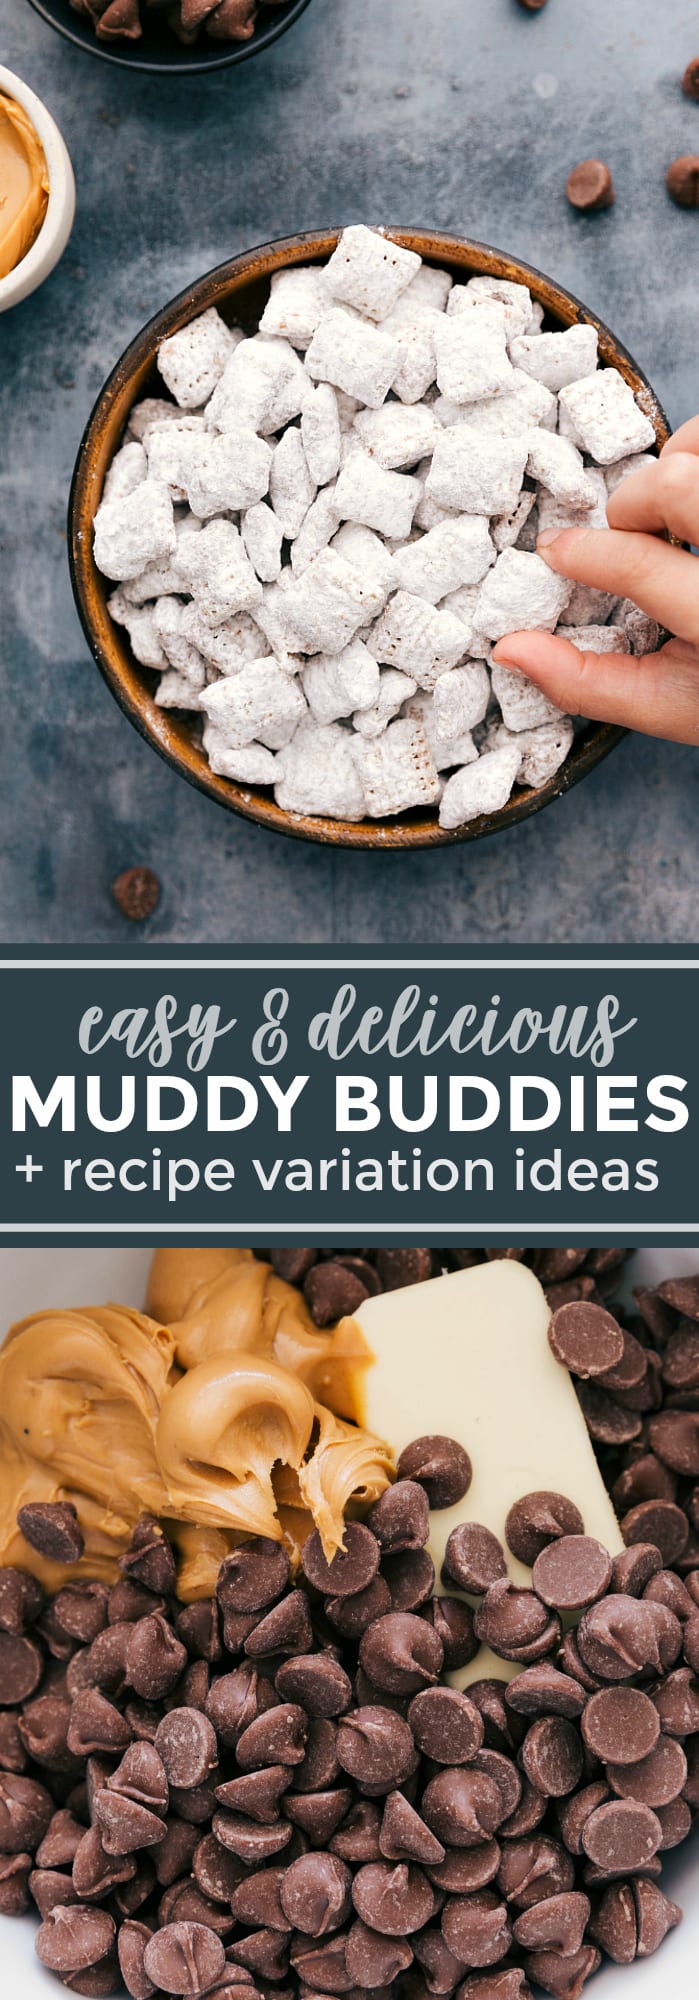 These Muddy Buddies (also known as Puppy Chow) are the best easy treat! No baking required and only 7 ingredients required! Plus variation ideas! via chelseasmessyapron.com #puppy #chow #muddy #buddies #recipe #easy #quickly #no #bake #recipe #dessert #kidfriendly #party #snack